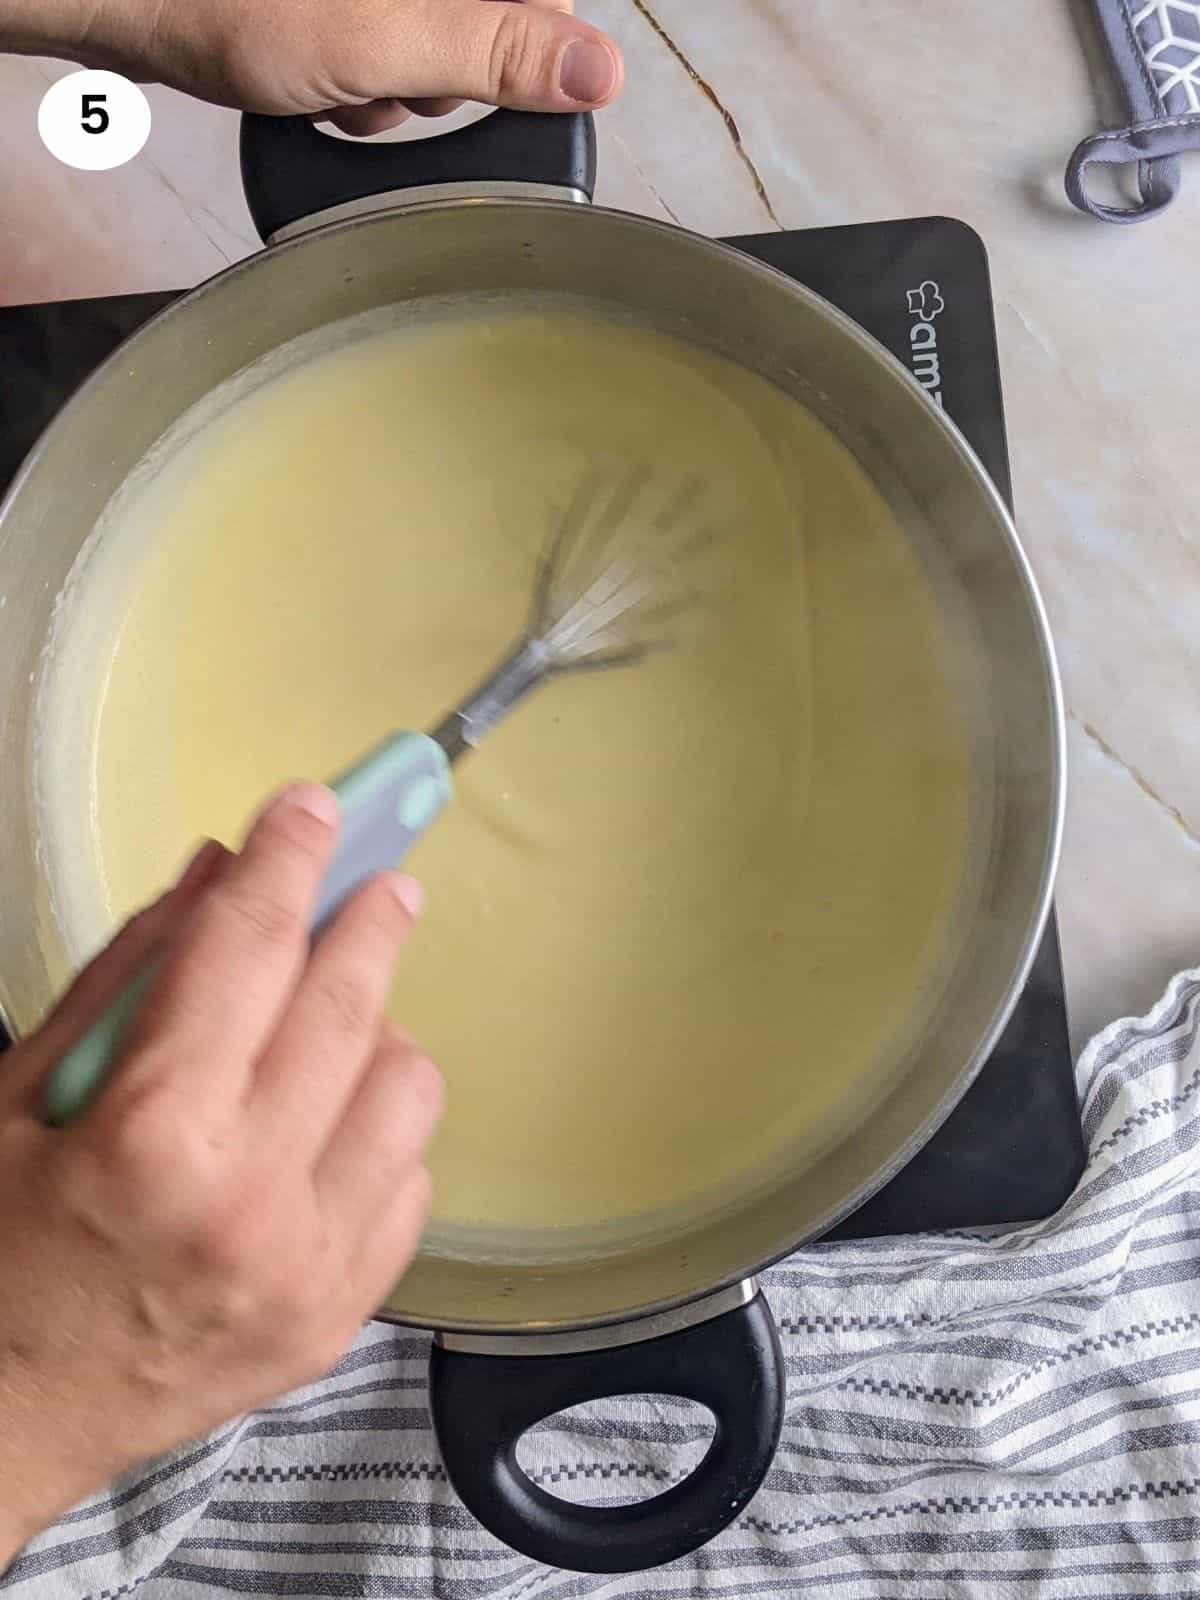 Heating the batter until it becomes custard.